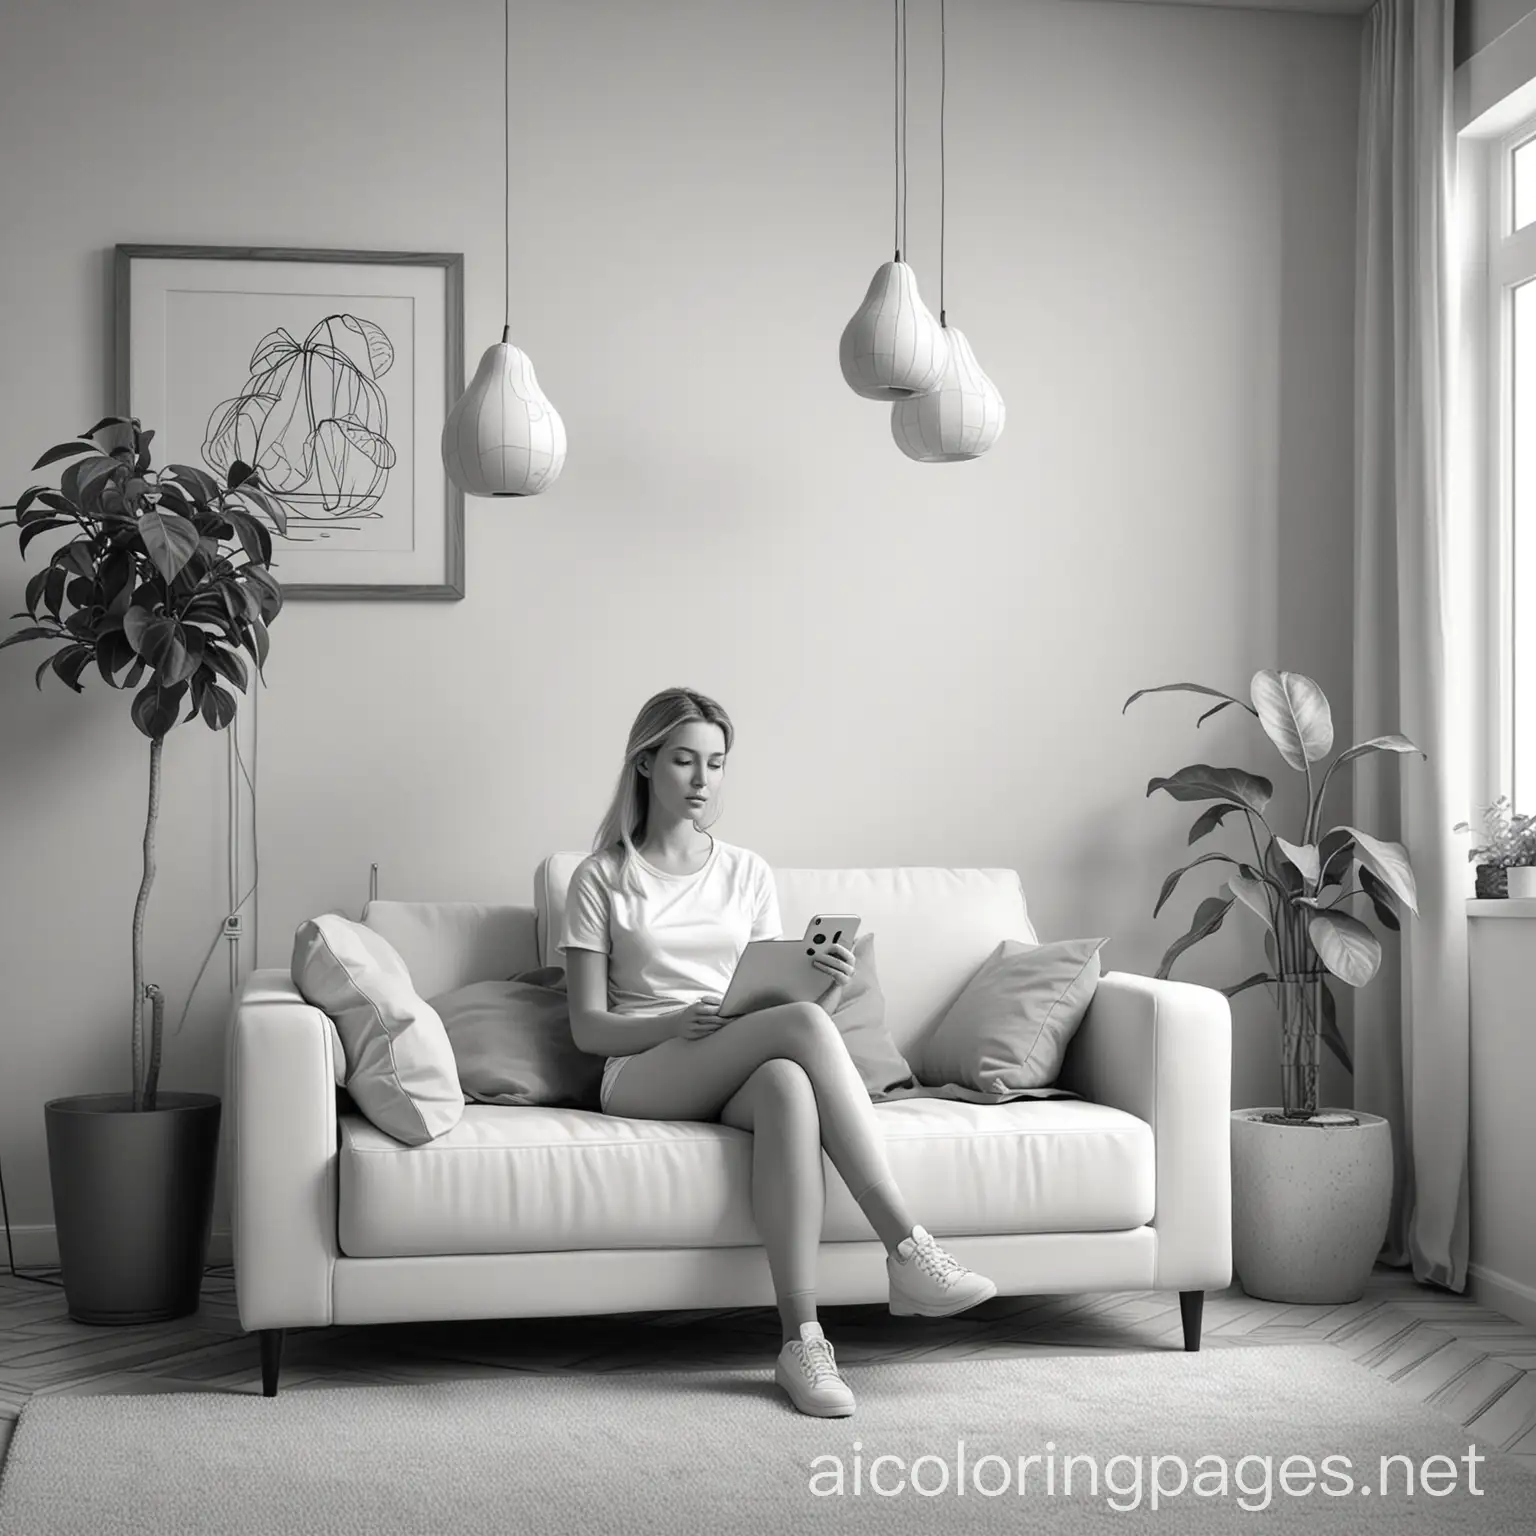 A captivating 3D animation scene featuring three fruits in a dimly lit industrial space. A pear, wearing a surprised expression, stands

Beautiful Caucasian Female Using Smartphone in Stylish Living Room while Resting on a Cozy Couch Sofa. Young Woman at Home, Browsing Internet, Using Social Networks, Having Fun in Flat., Coloring Page, black and white, line art, white background, Simplicity, Ample White Space. The background of the coloring page is plain white to make it easy for young children to color within the lines. The outlines of all the subjects are easy to distinguish, making it simple for kids to color without too much difficulty